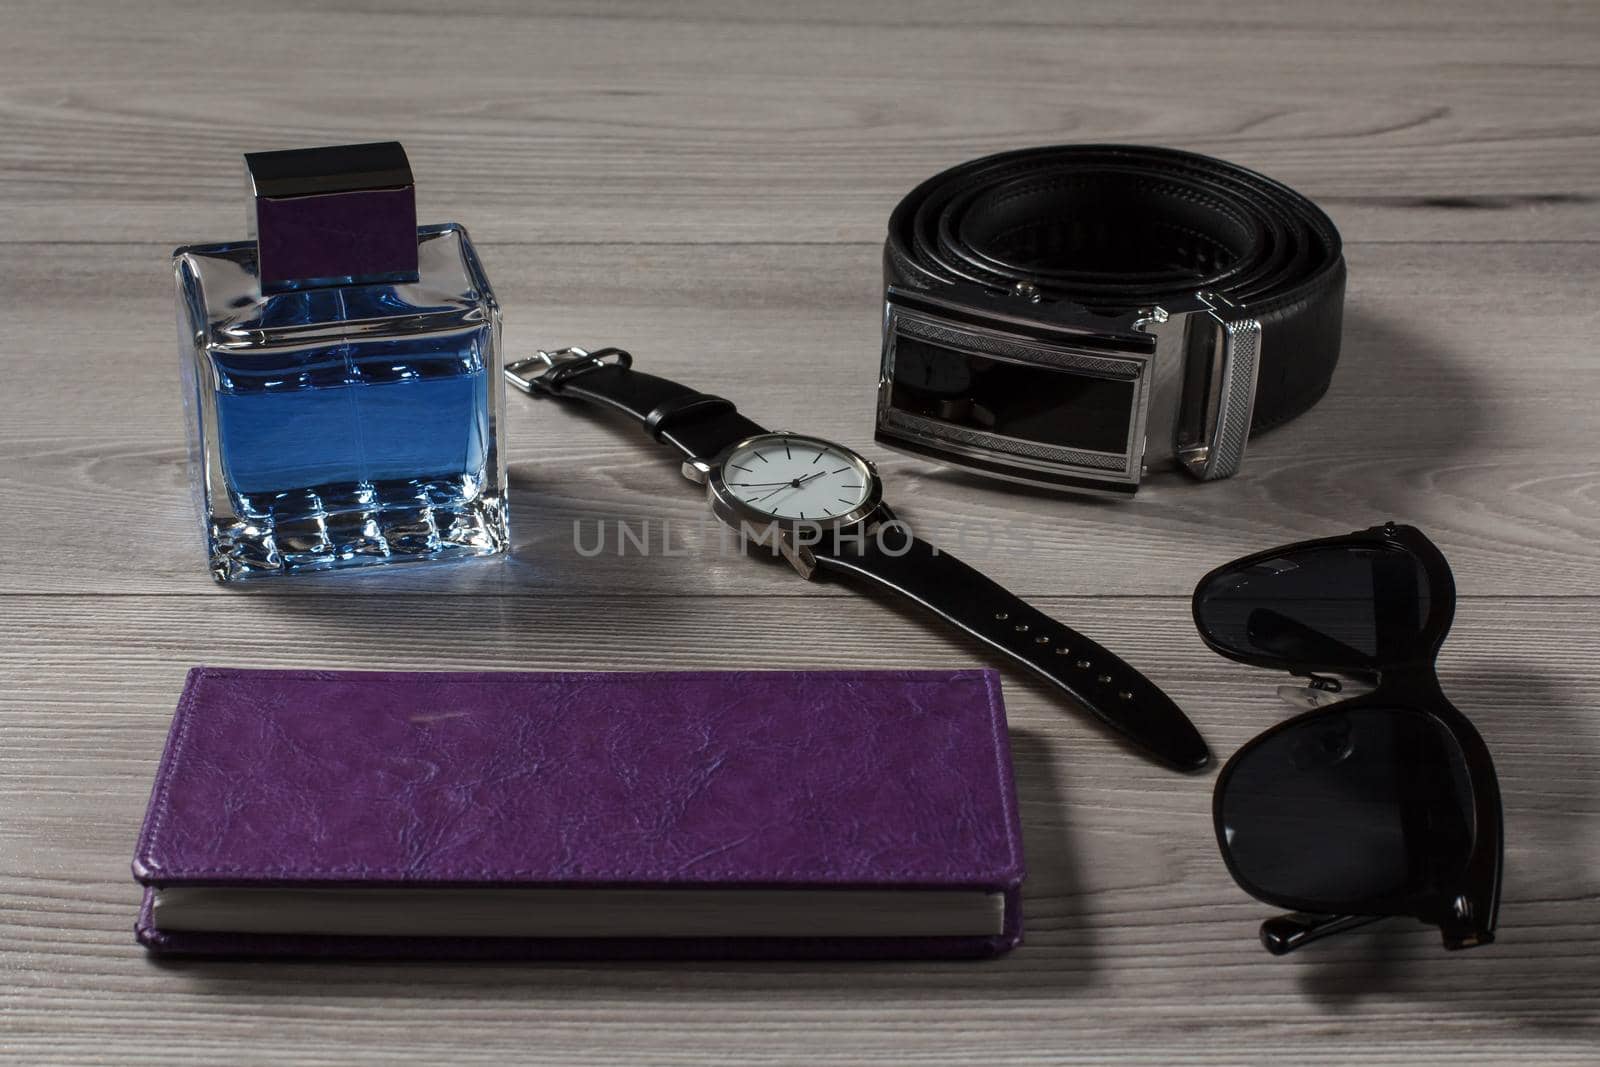 Man perfume, watch with a leather strap, leather belt with metal buckle, notebook in purple cover, black sunglasses on a gray wooden background